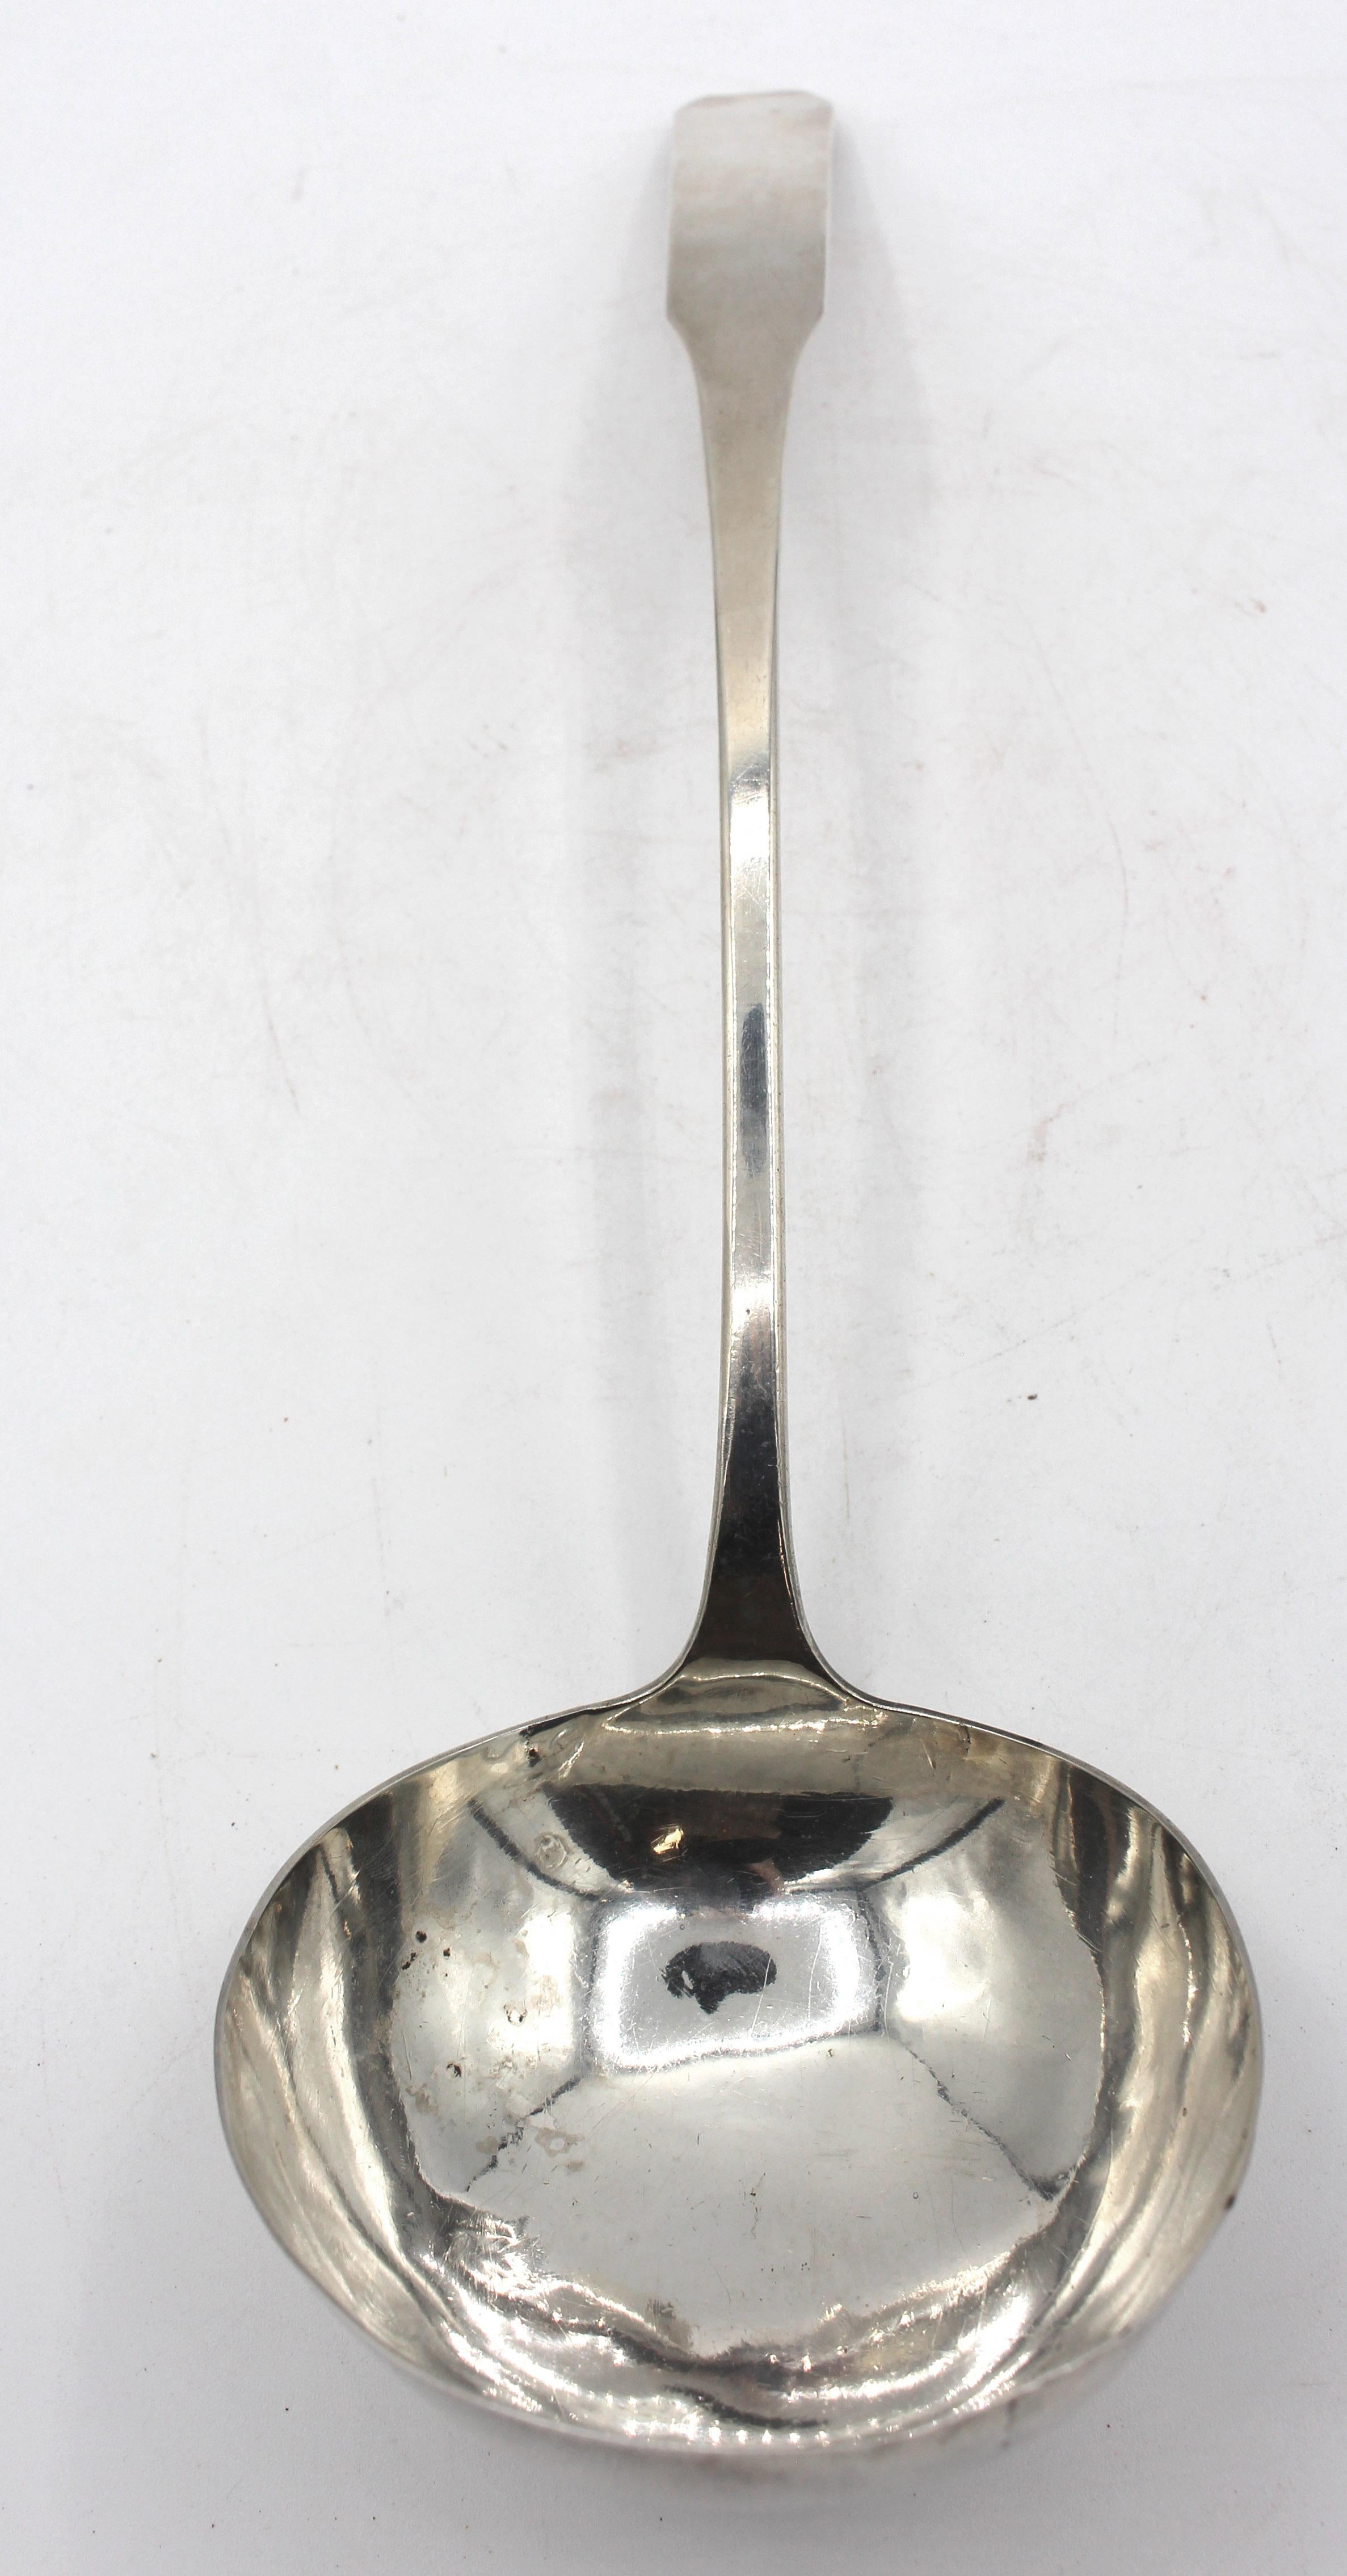 Early-mid 19th century large coffin-fiddle transitional coin silver ladle, North Carolina. A excecptional, rare, and large; by Edward Hoell of Washington, NC (1816-28), as well as working in Greenville (1830-47). Double stamped E. Hoell. Never